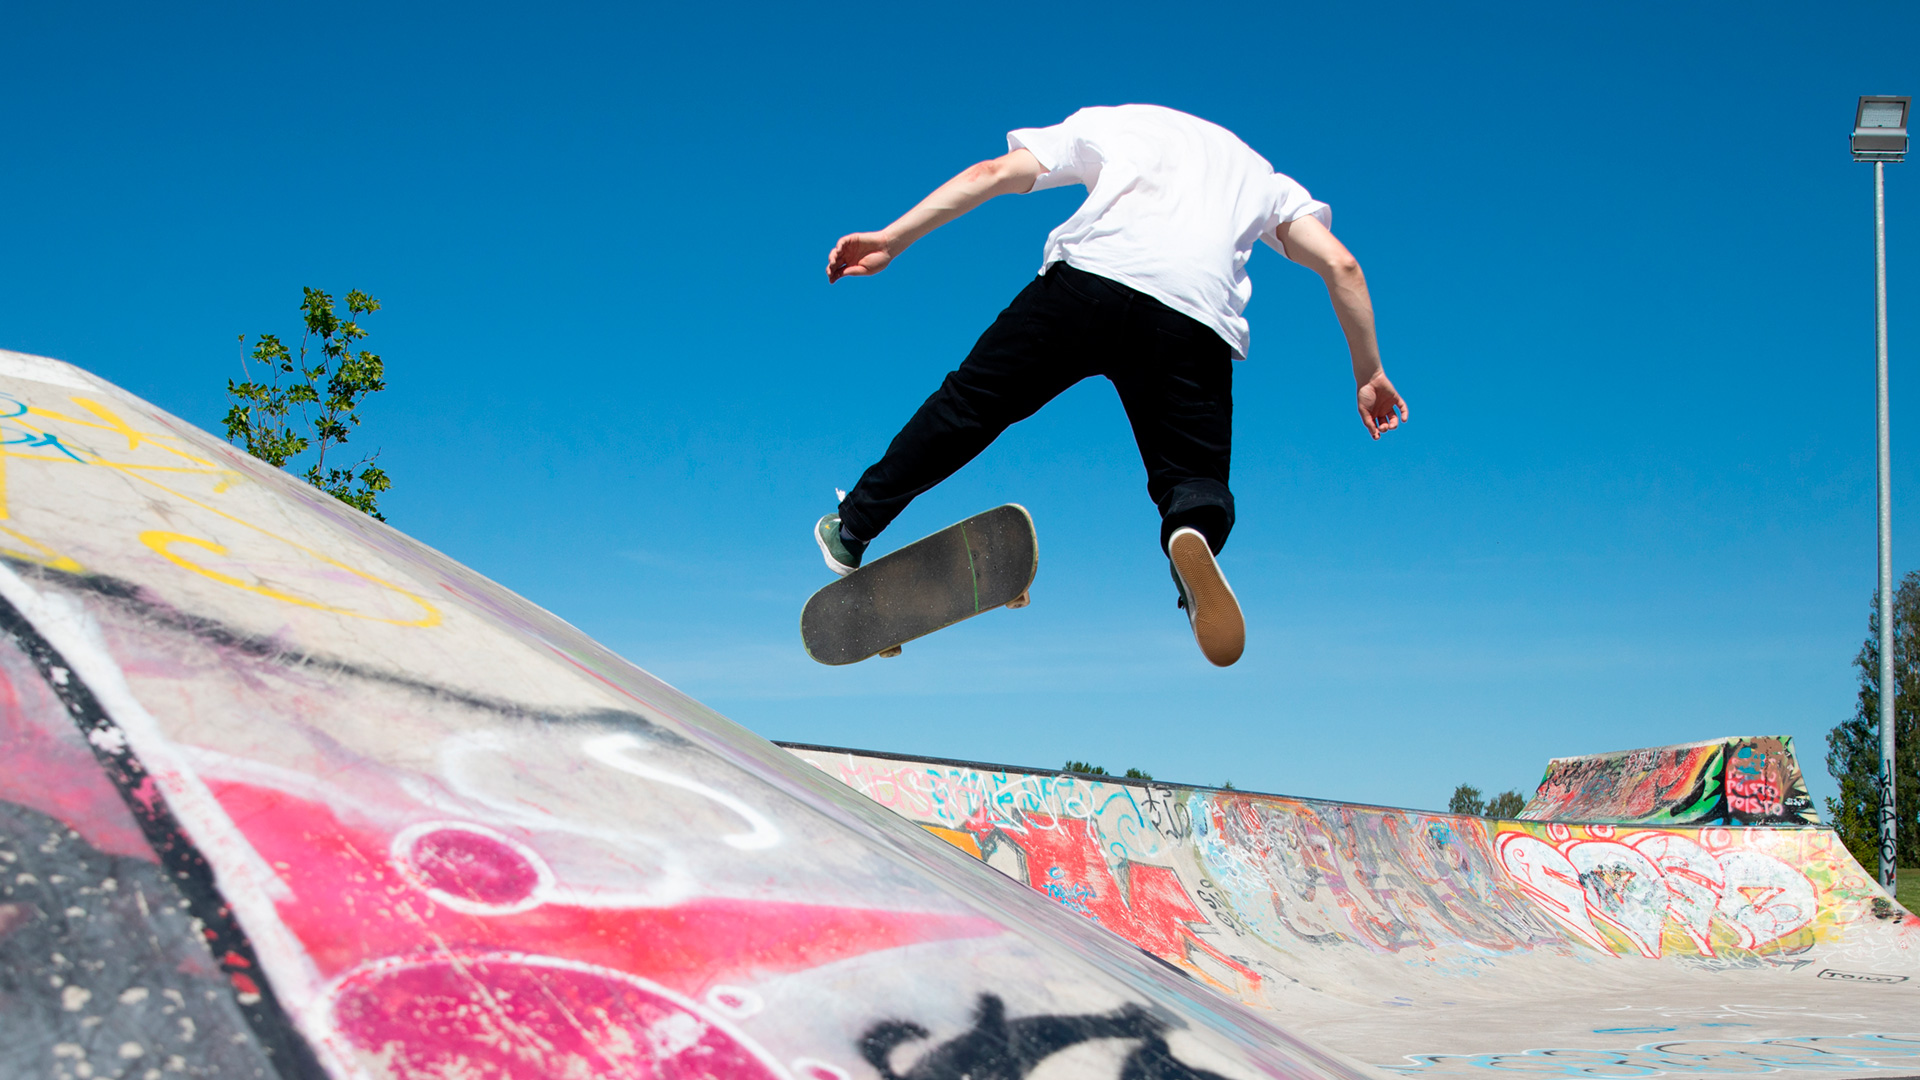 A person wearing a white shirt and black pants is skateboarding in a skate park decorated with colourful graffiti underneath a blue sky. The person is in the middle of a trick, and the skateboard is rolling around under their feet.